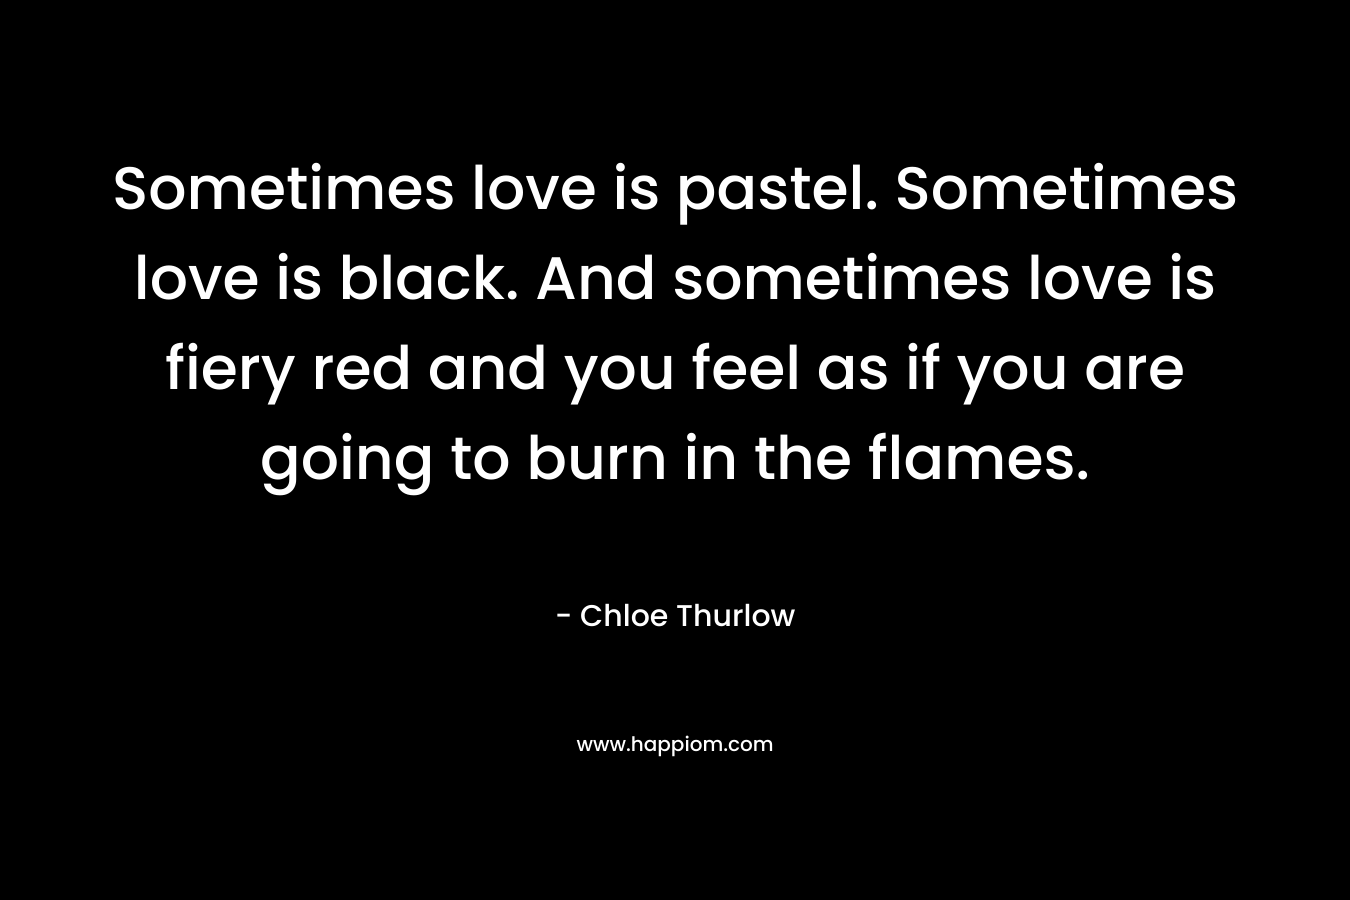 Sometimes love is pastel. Sometimes love is black. And sometimes love is fiery red and you feel as if you are going to burn in the flames.